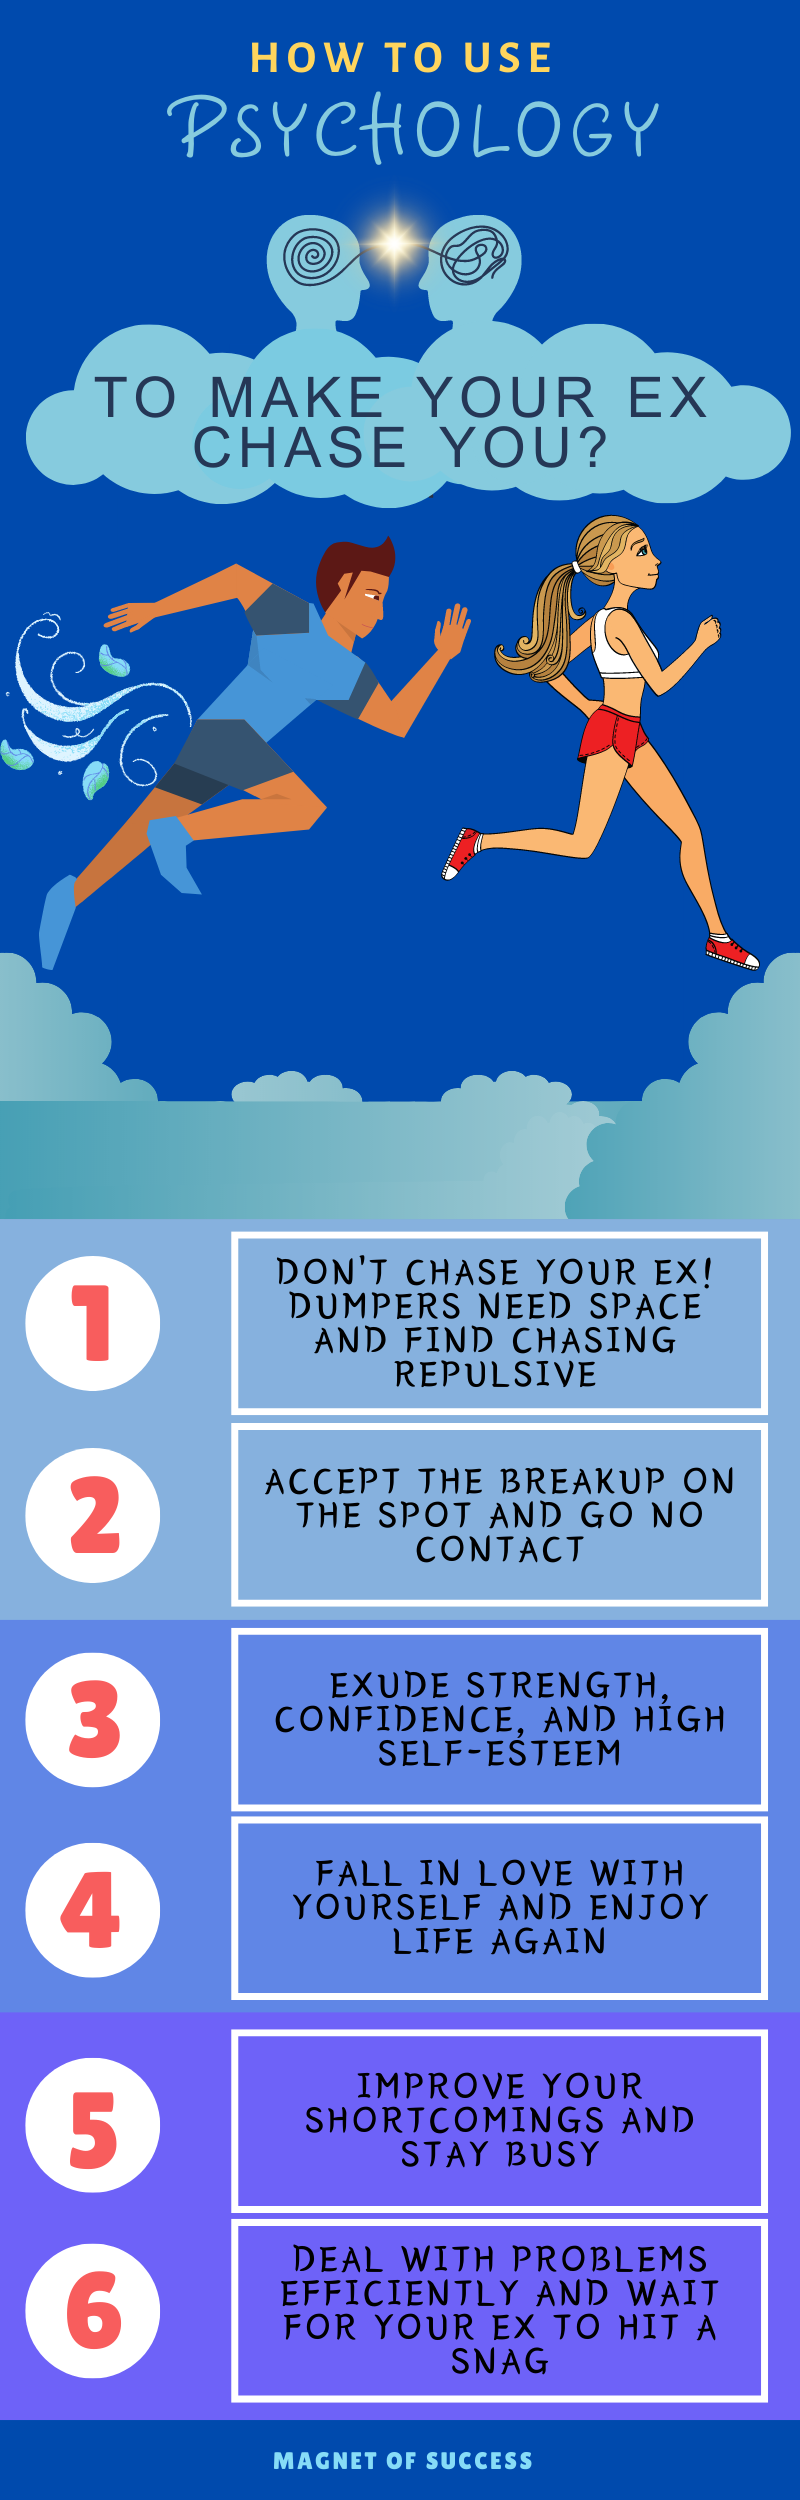 How to make your ex chase you with psychology